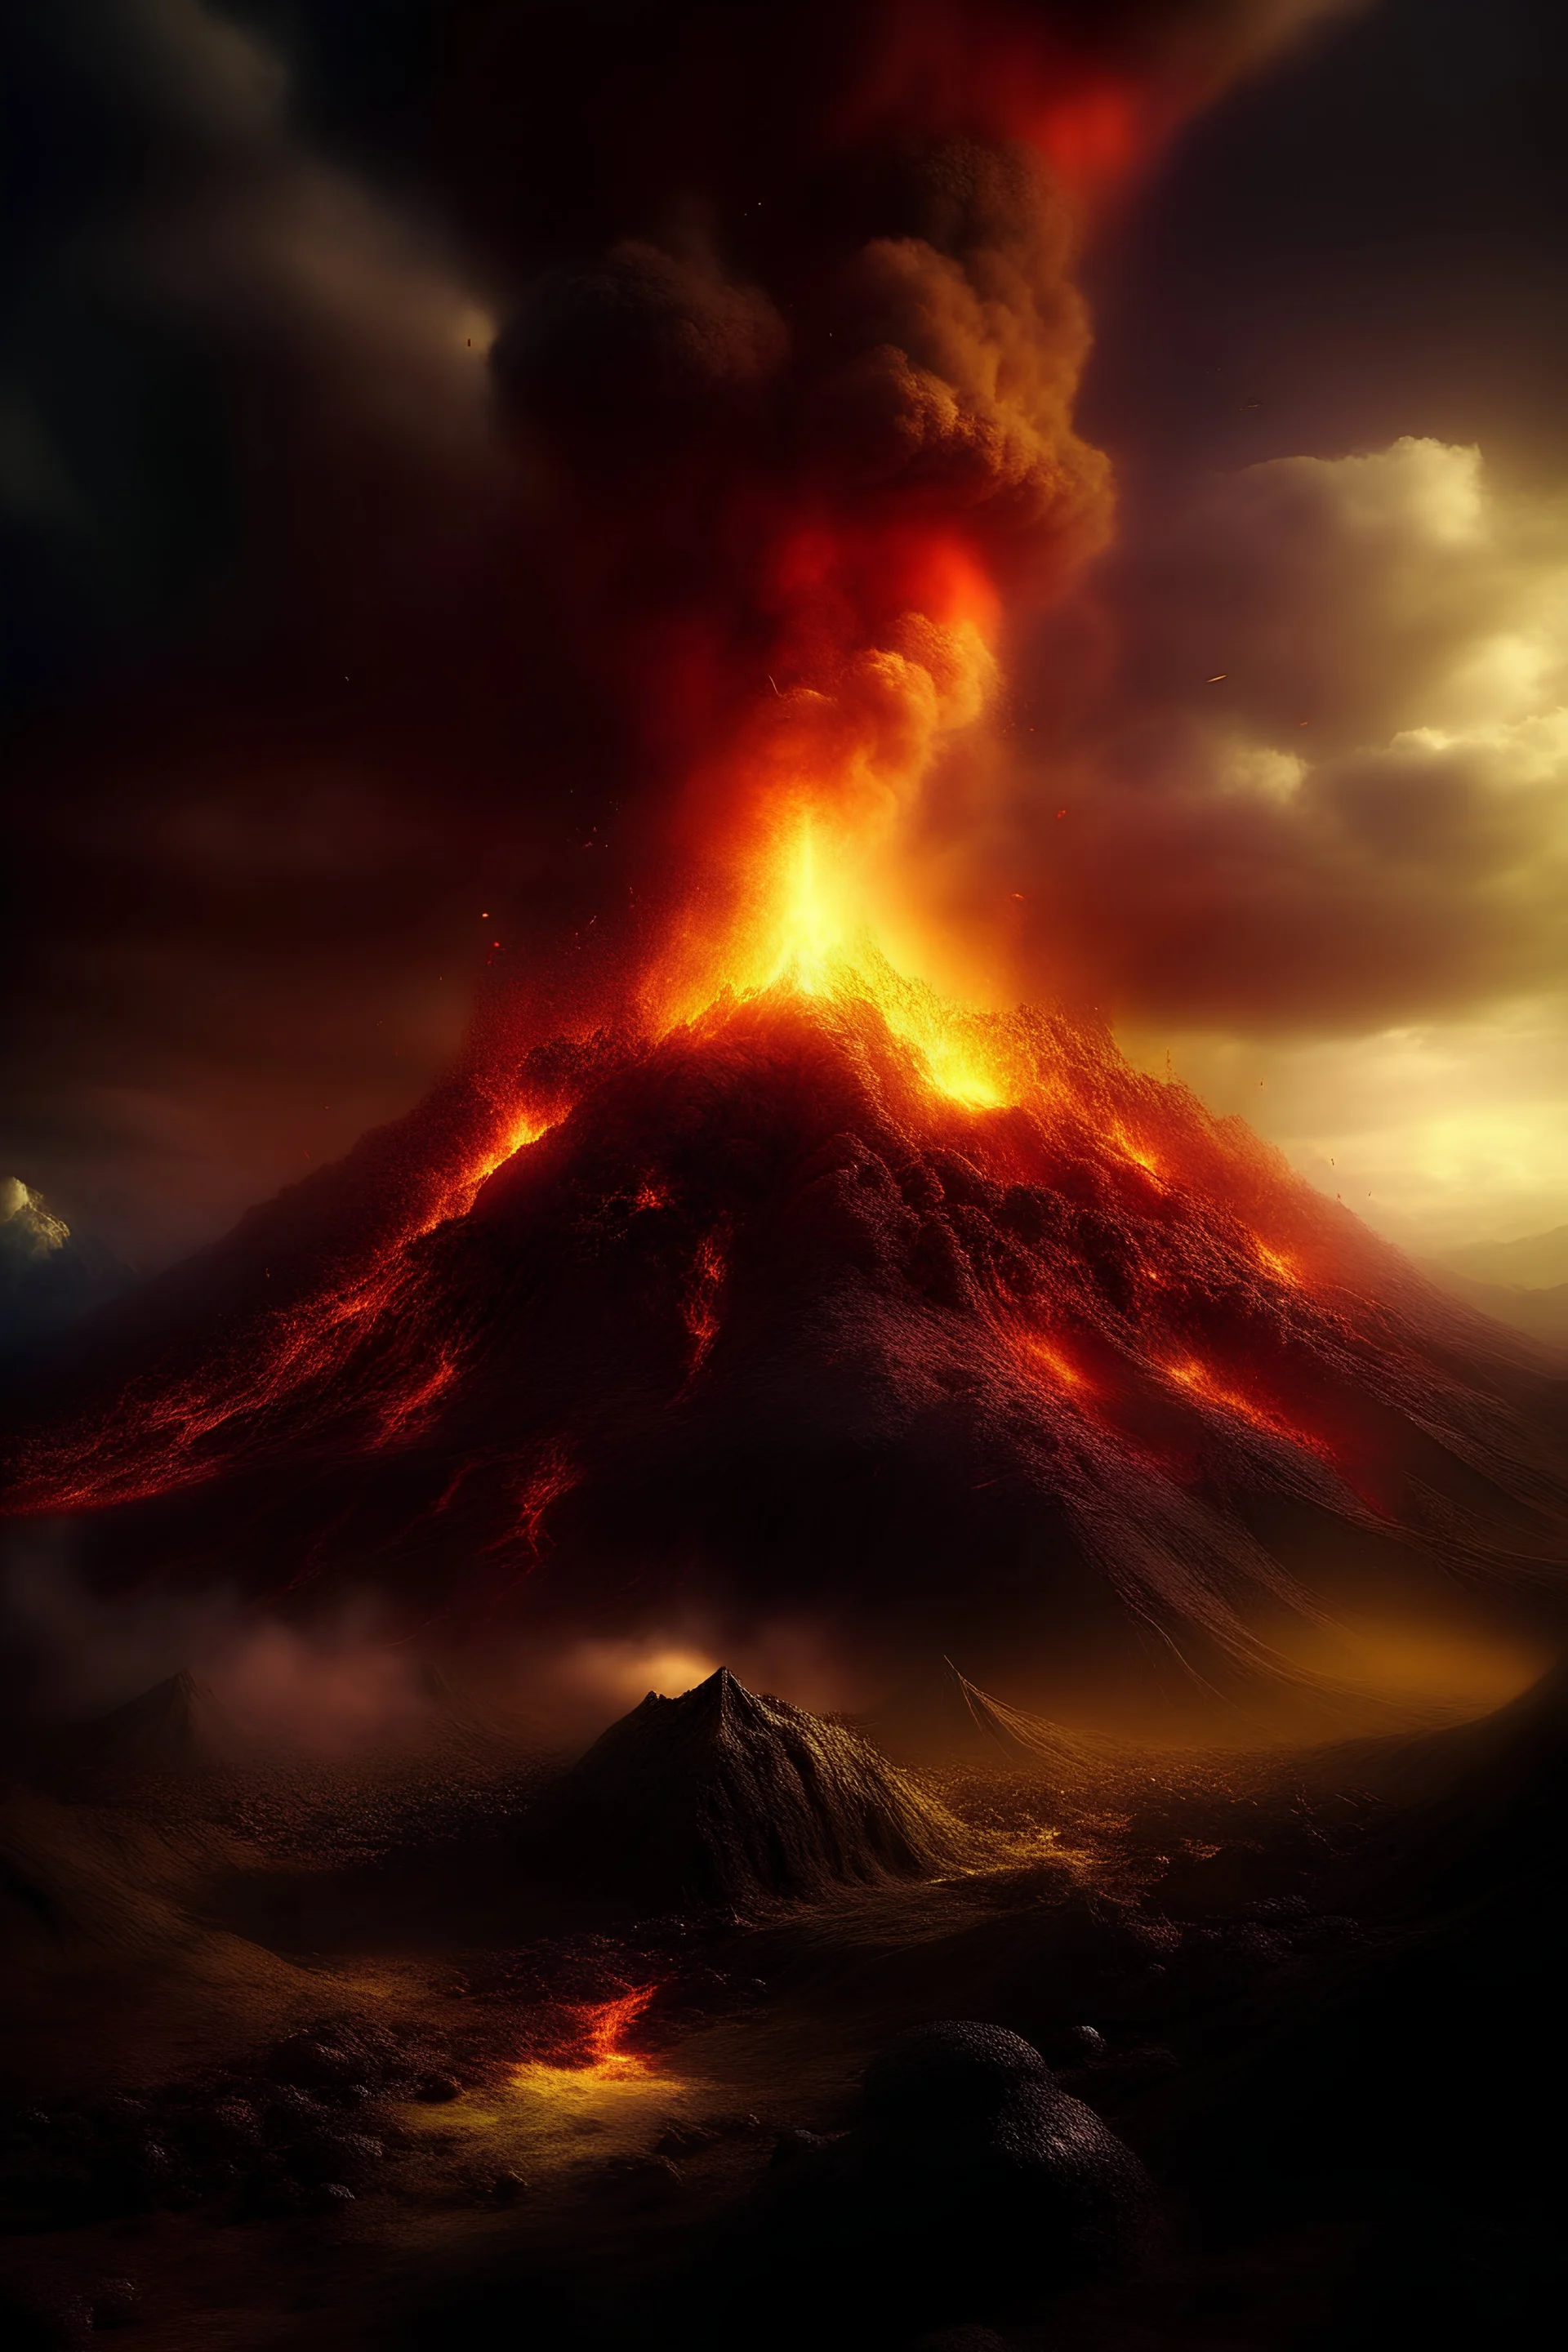 **Prompt for AI to Generate an Exploding Volcano Image:** **Title:** "Eruptive Majesty" **Description:** Create a vivid and awe-inspiring image of a volcano in the midst of a powerful eruption. Capture the intense energy and chaotic beauty as molten lava spews forth from the crater, casting an ominous glow against the darkened sky. The eruption should convey a sense of raw power and primal force, with billowing plumes of smoke and ash swirling amidst the fiery lava flows. The landscape surroun